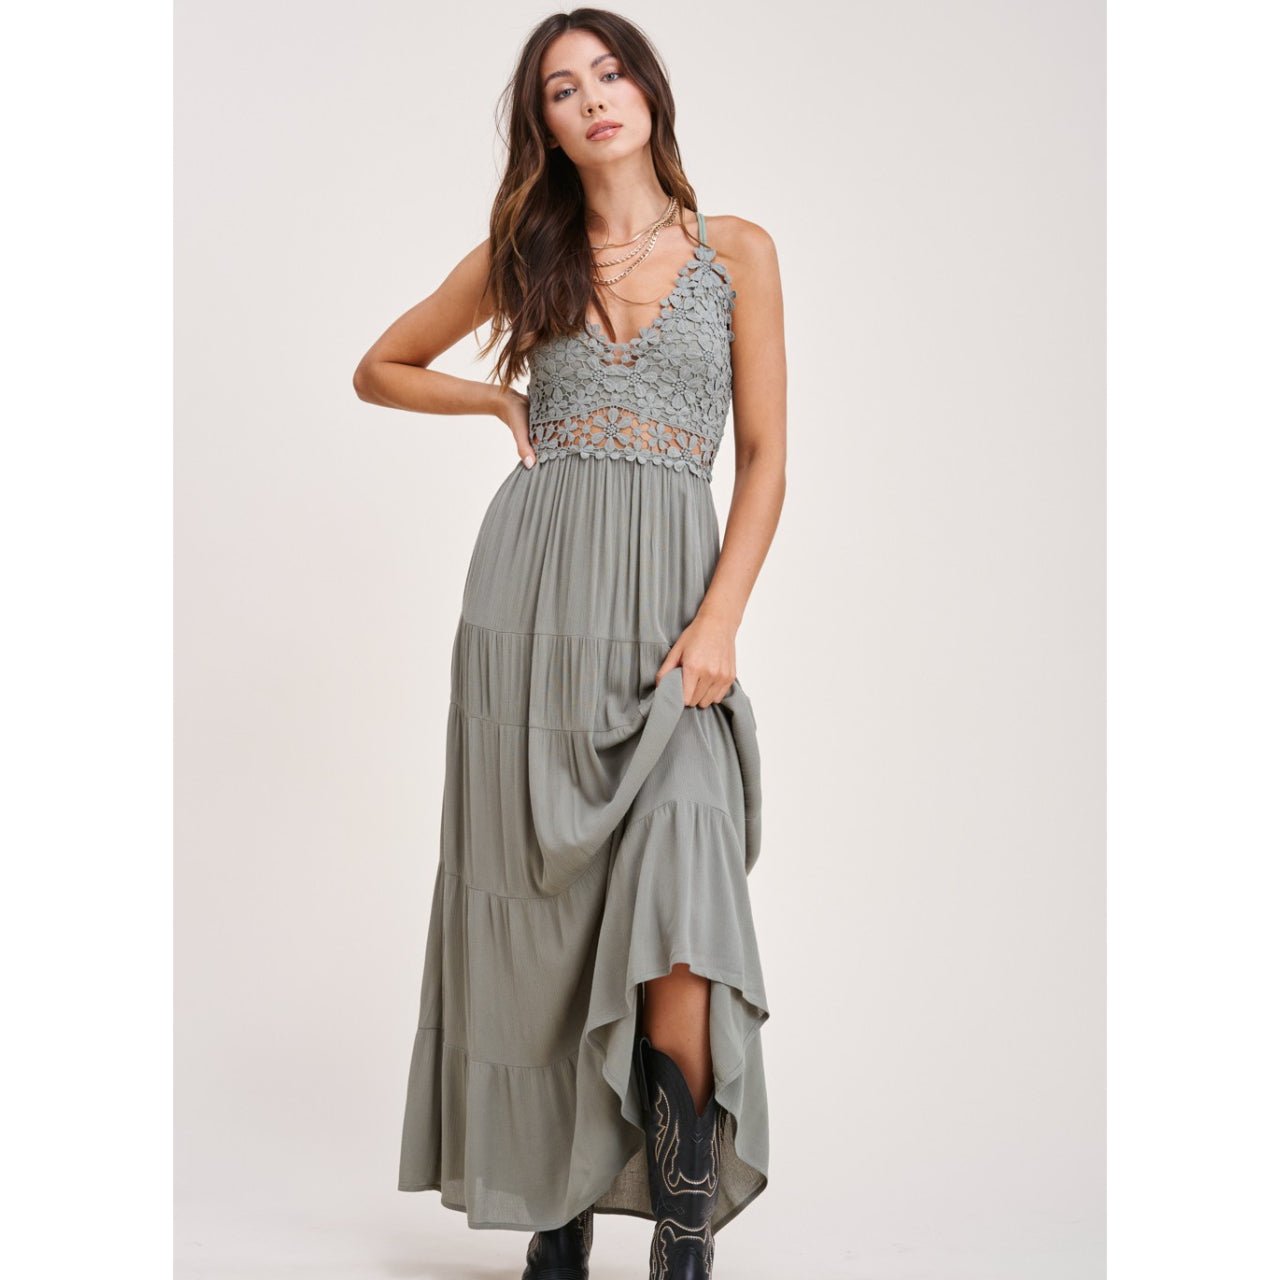 Mila Maxi Dress With Crochet Lace Trim - The Graphic Tee